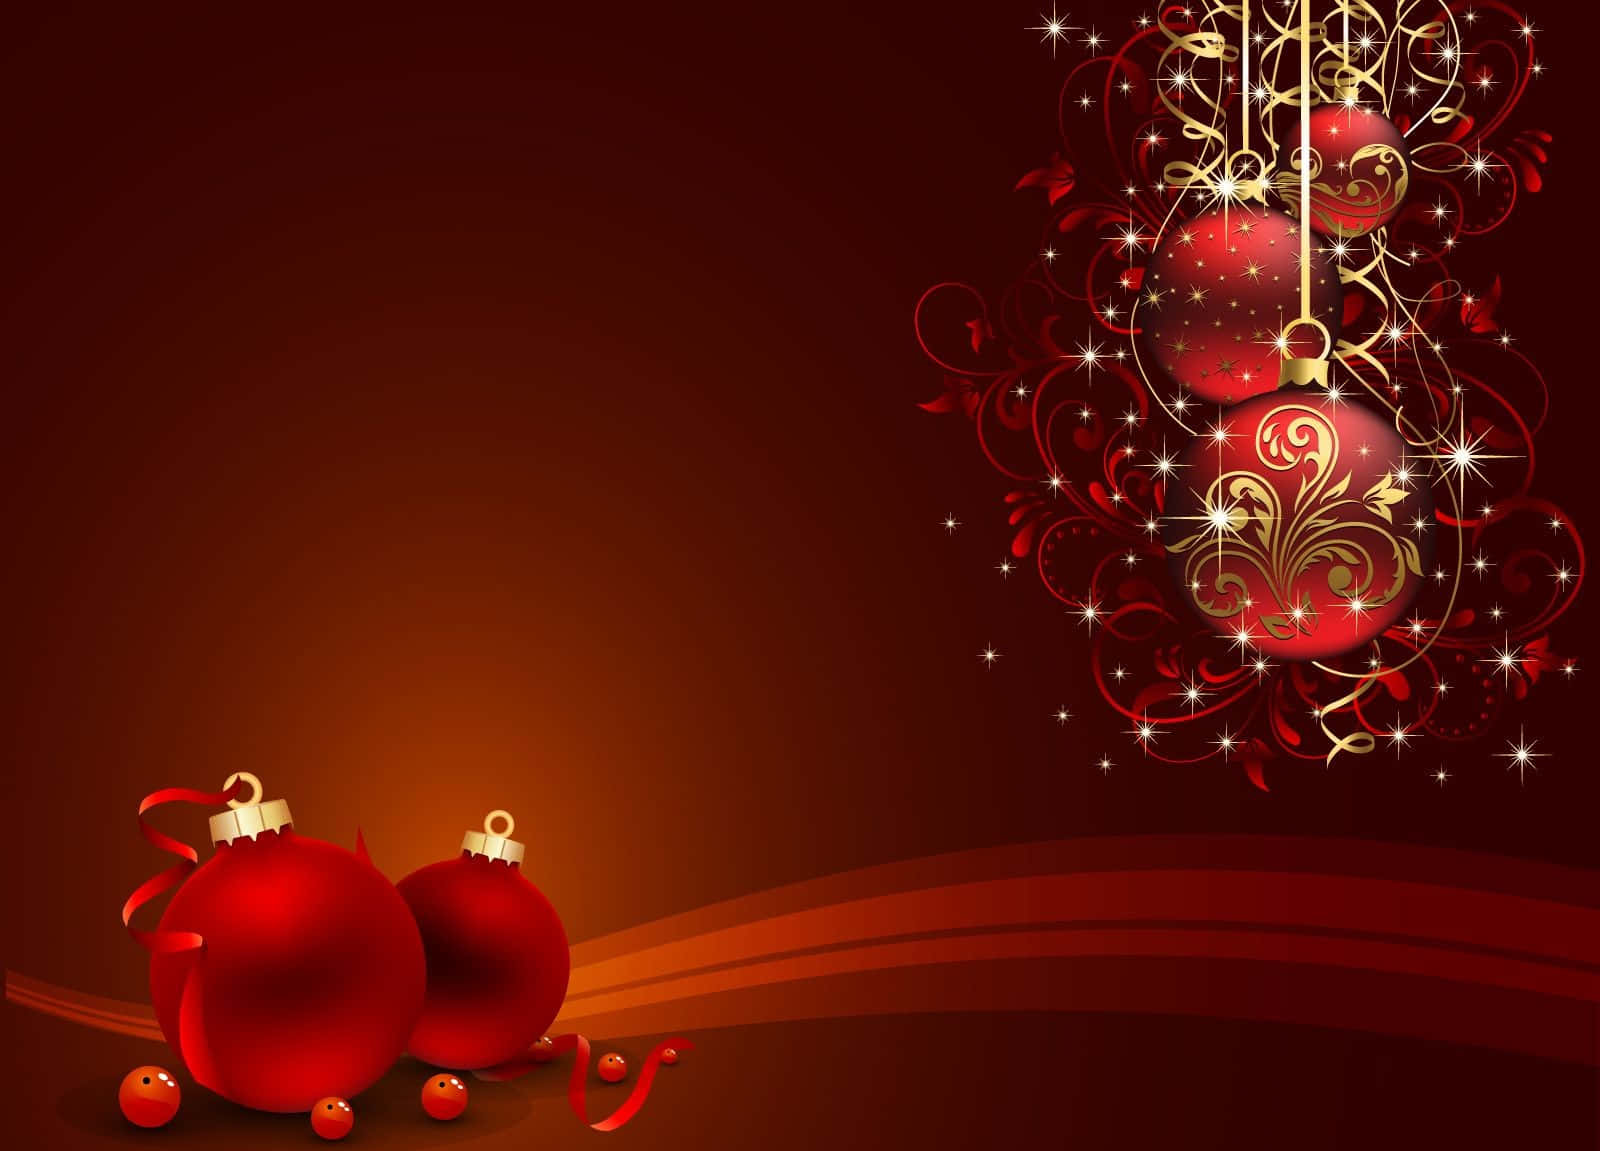 Celebrate the holiday season with a festive red aesthetic. Wallpaper